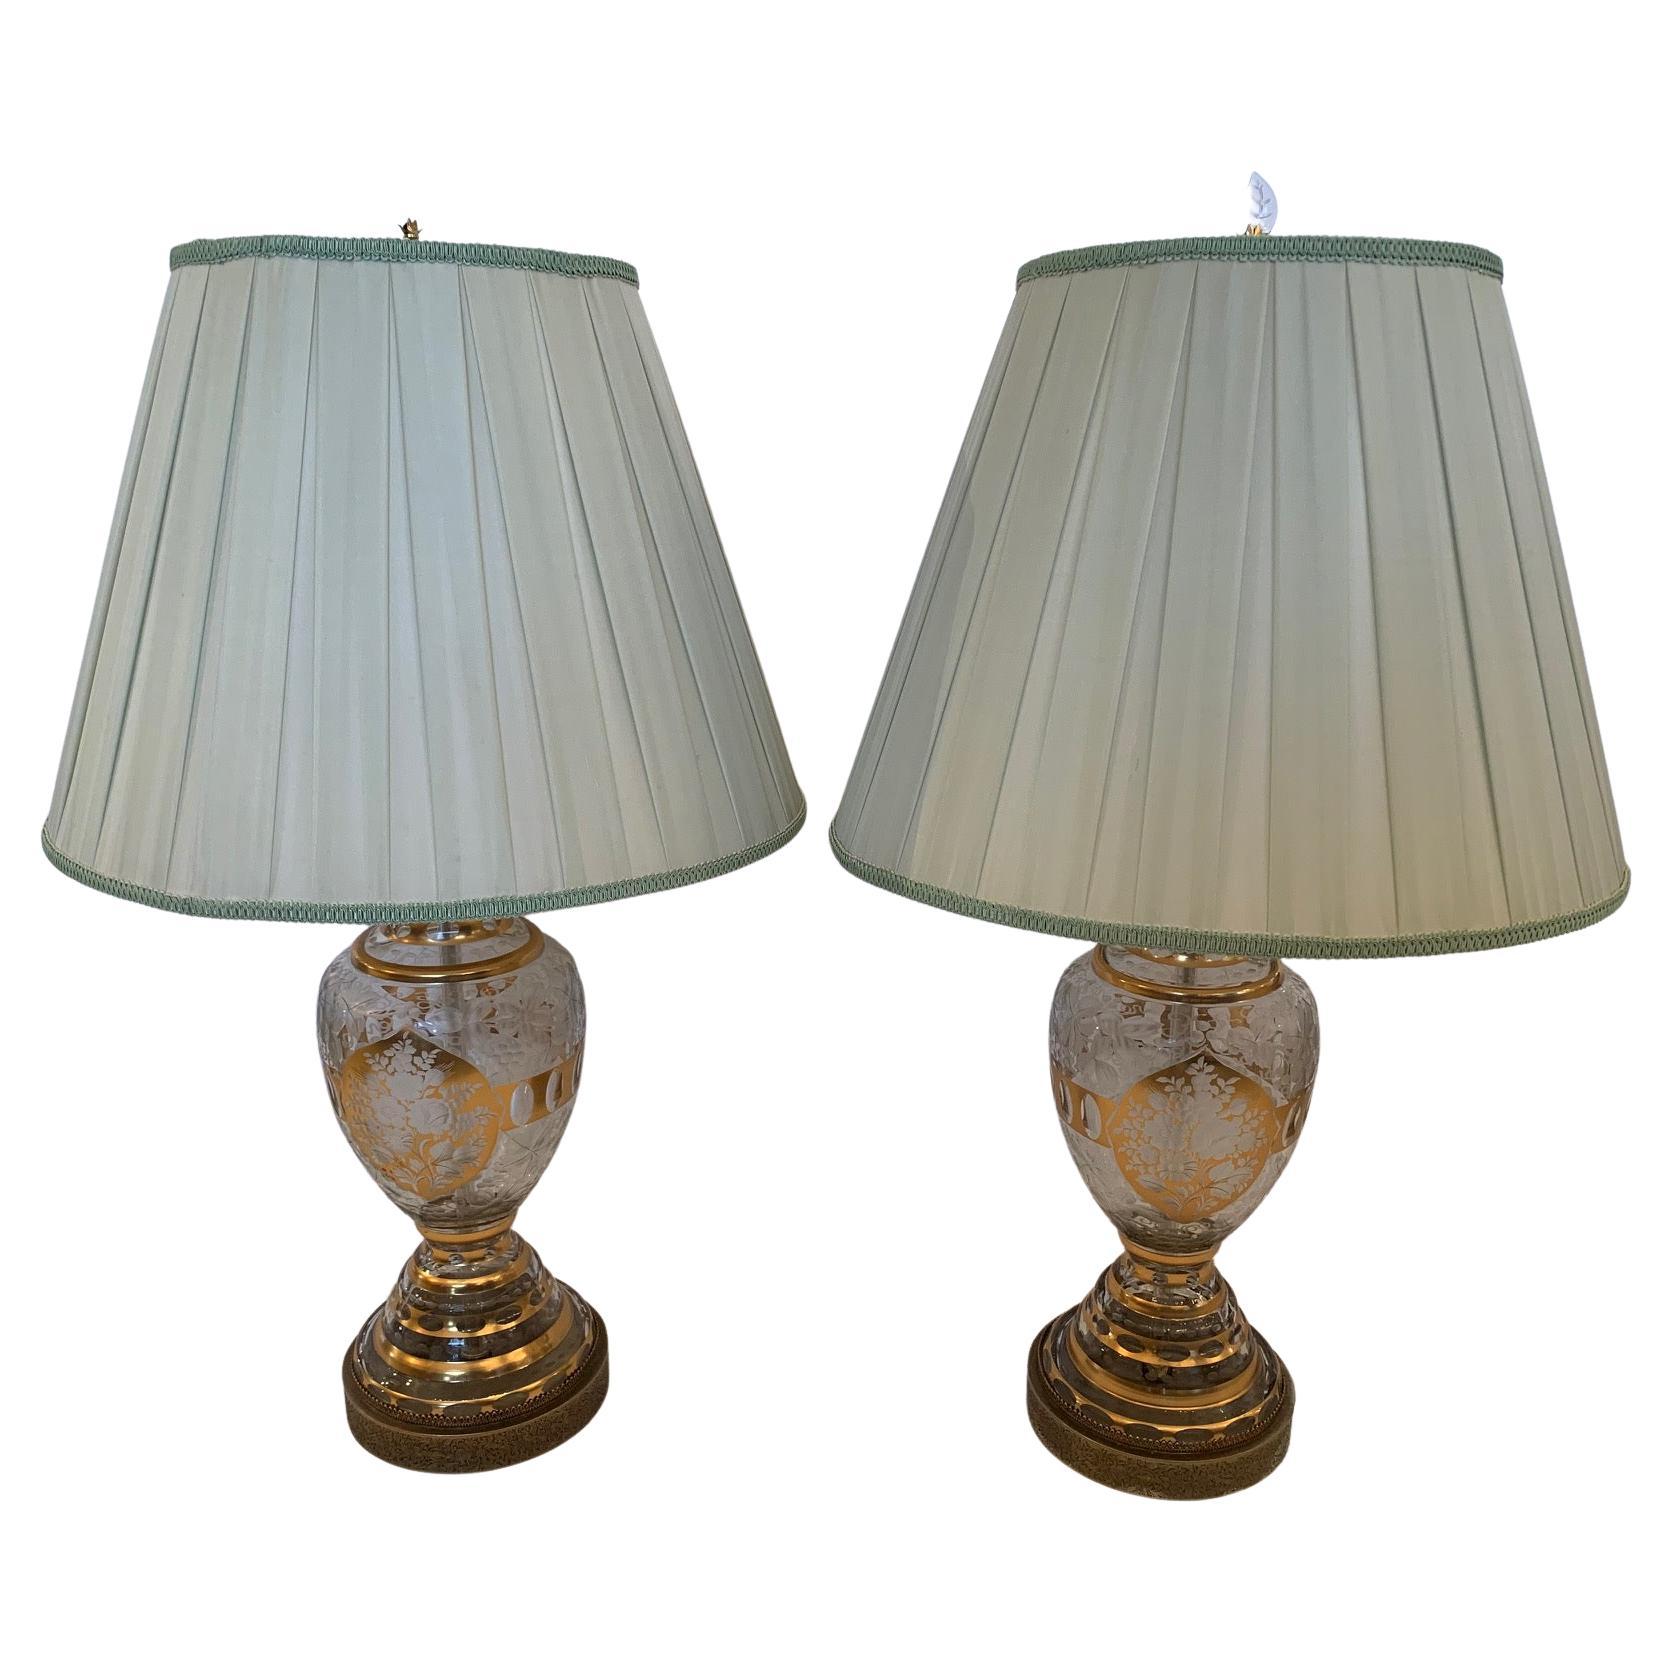 Glamorous Pair of Vintage Crystal Table Lamps